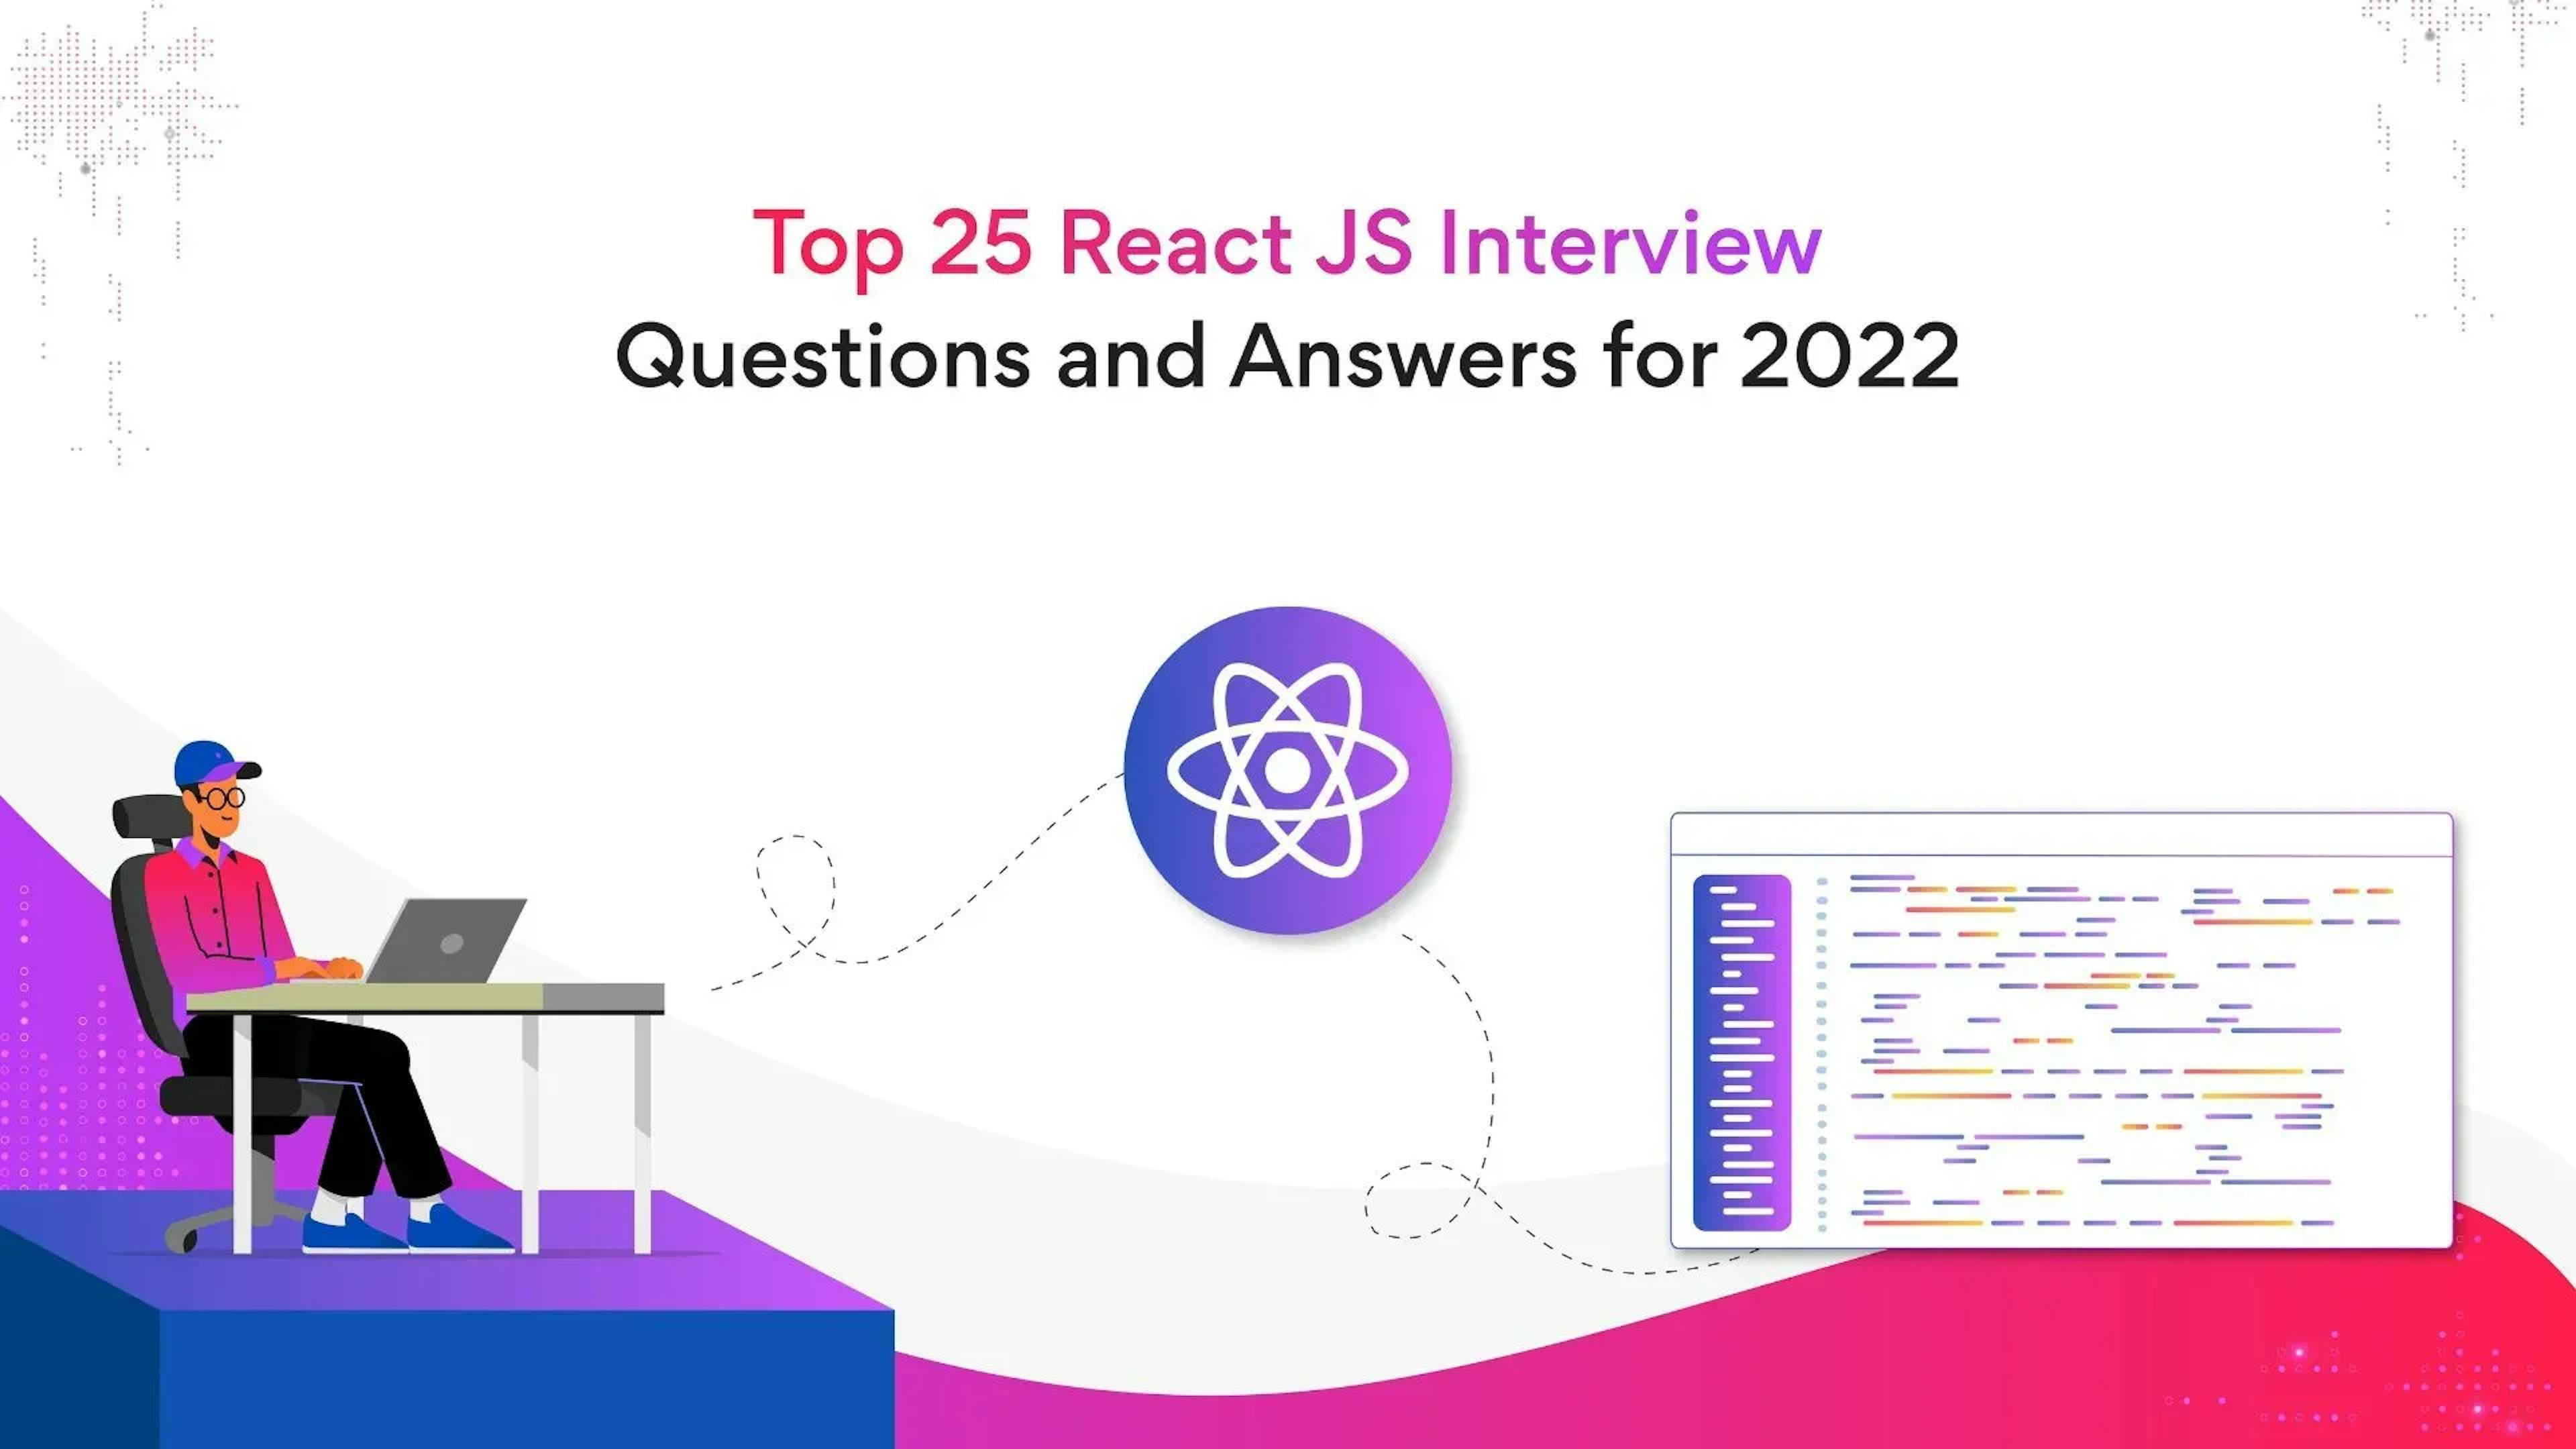 Top 25 React JS Interview Questions and Answers